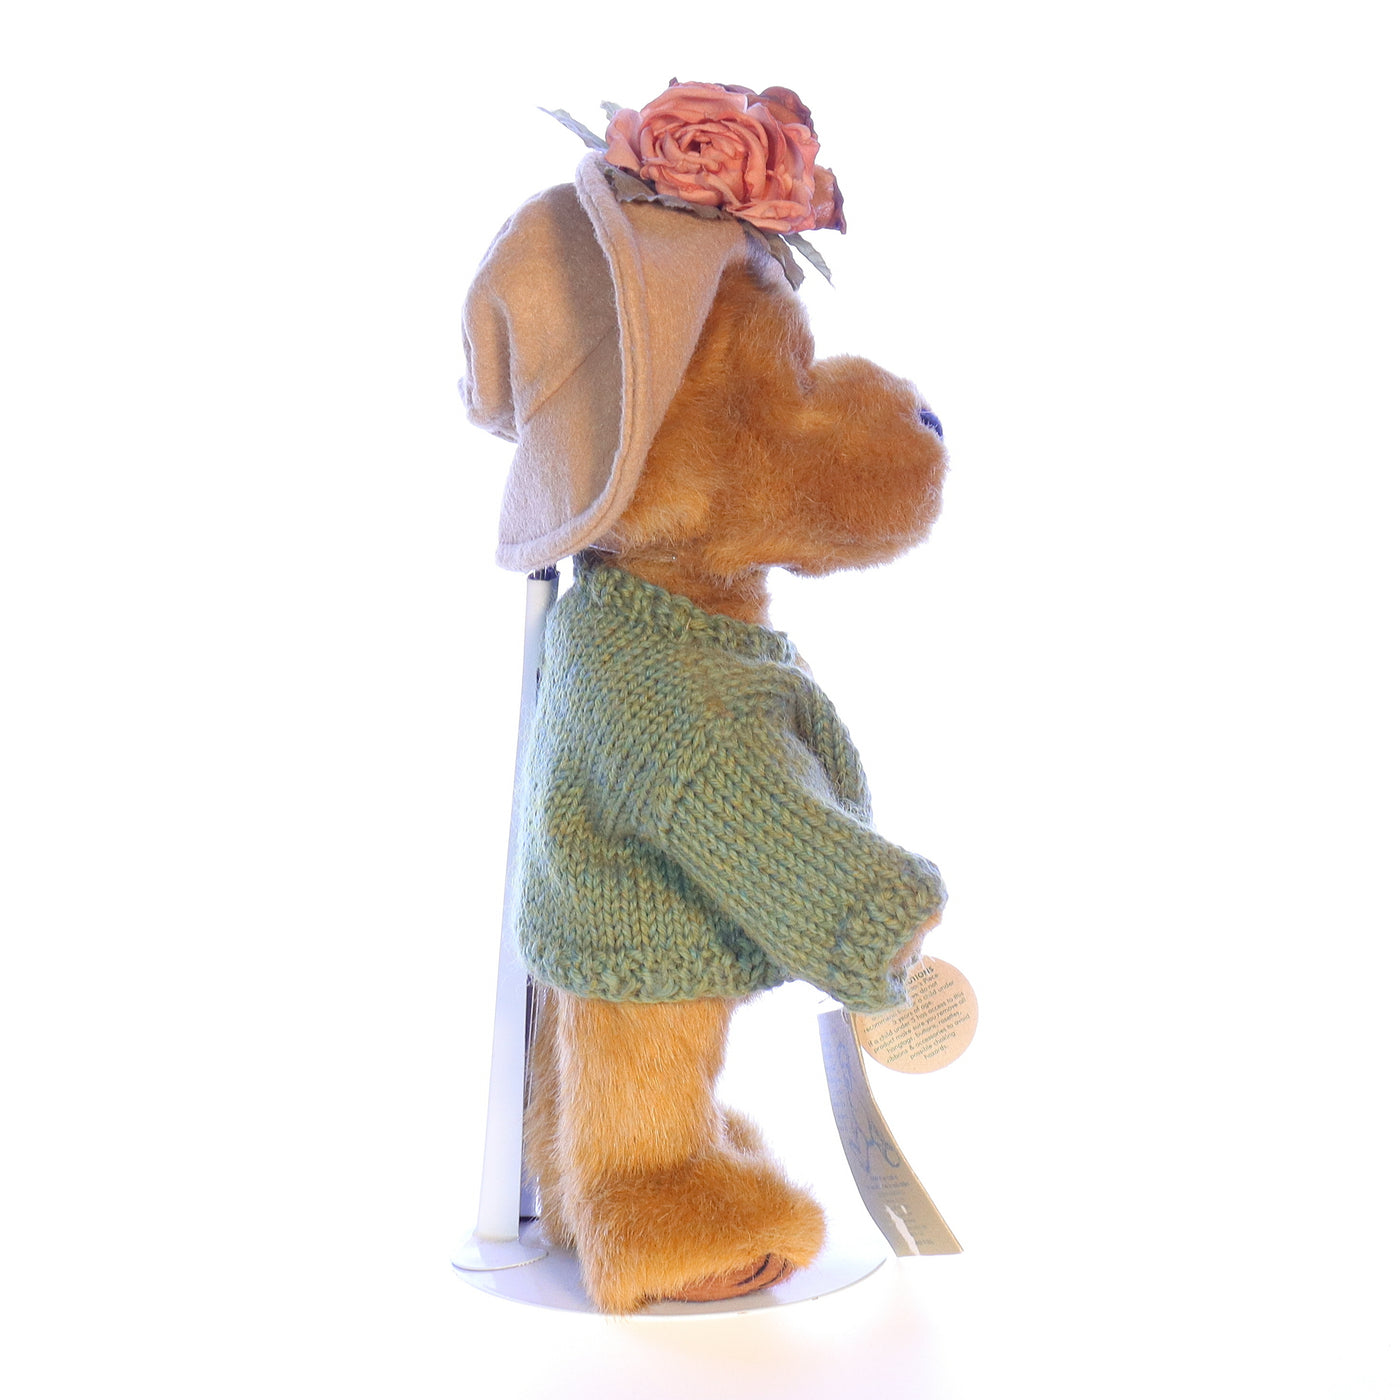 Boyds_Bears_and_Friends_91833_Mrs_Trumbull_Fashion_Stuffed_Animal_1985 Right View